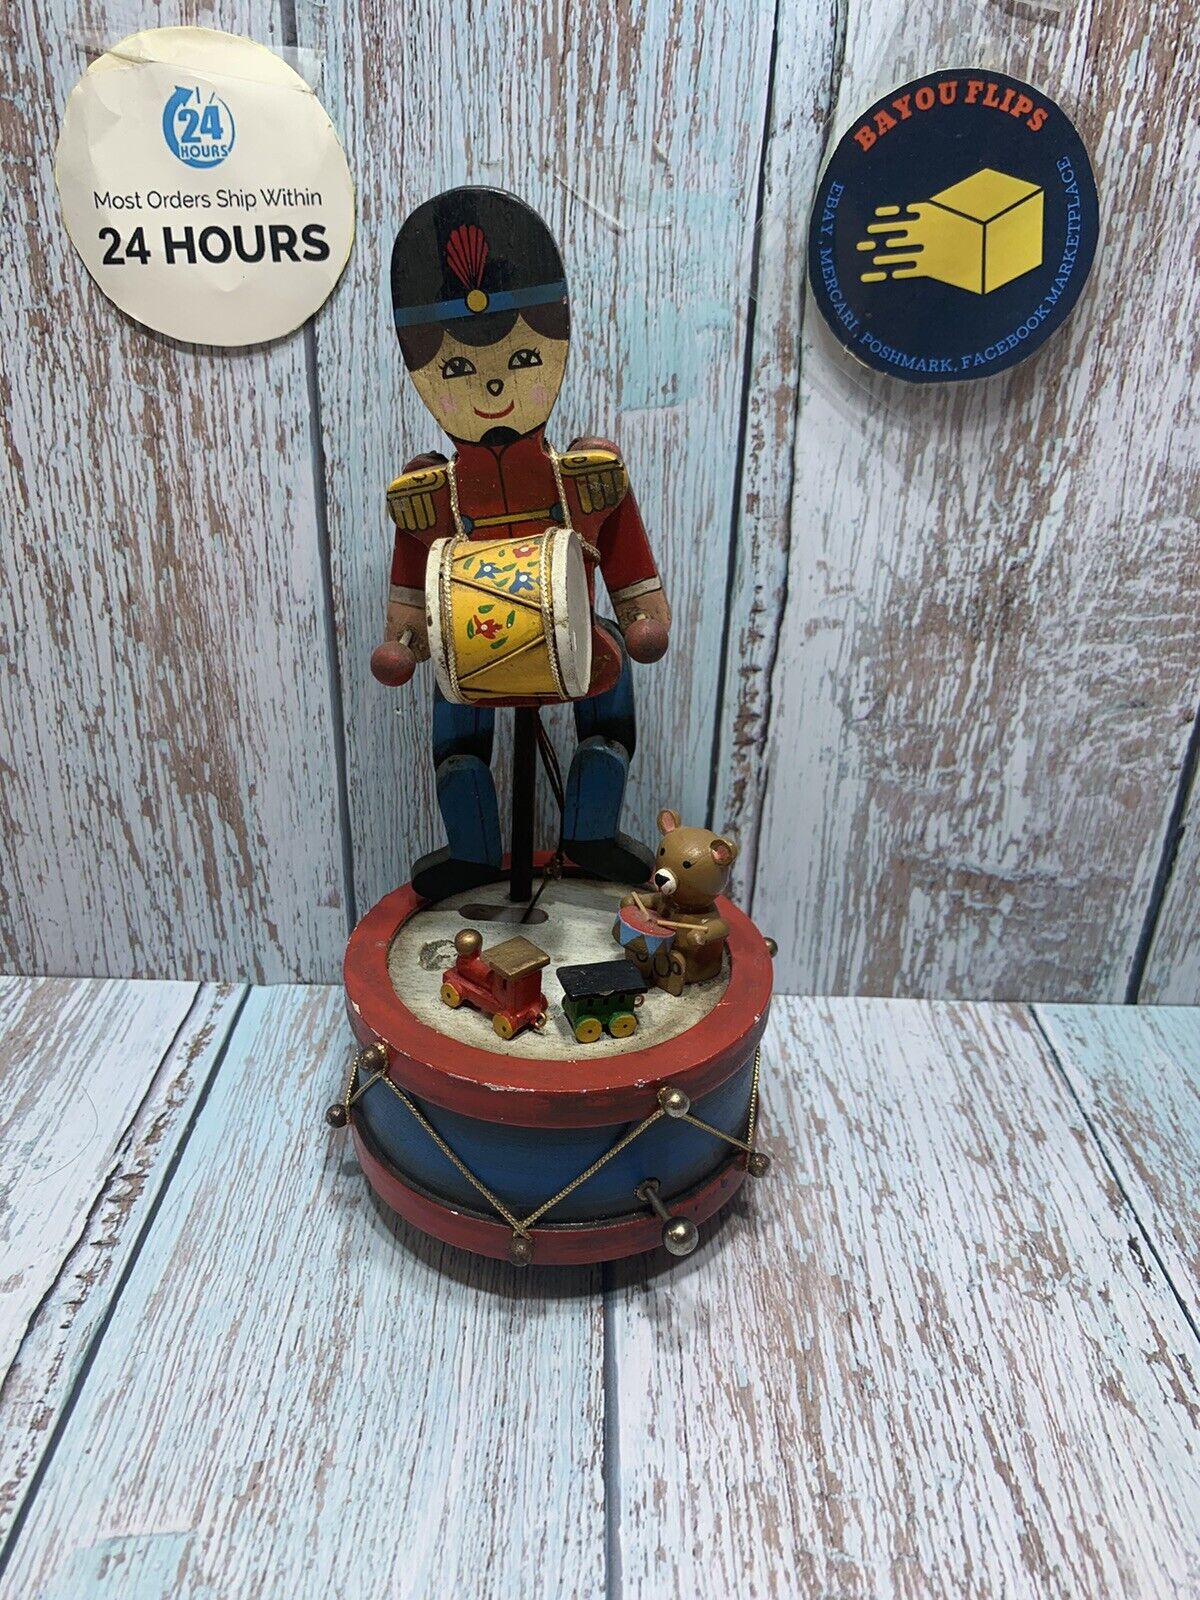 Enesco Music Box Vintage 1980 Parade of the Wooden Soldier Toy Soldier.